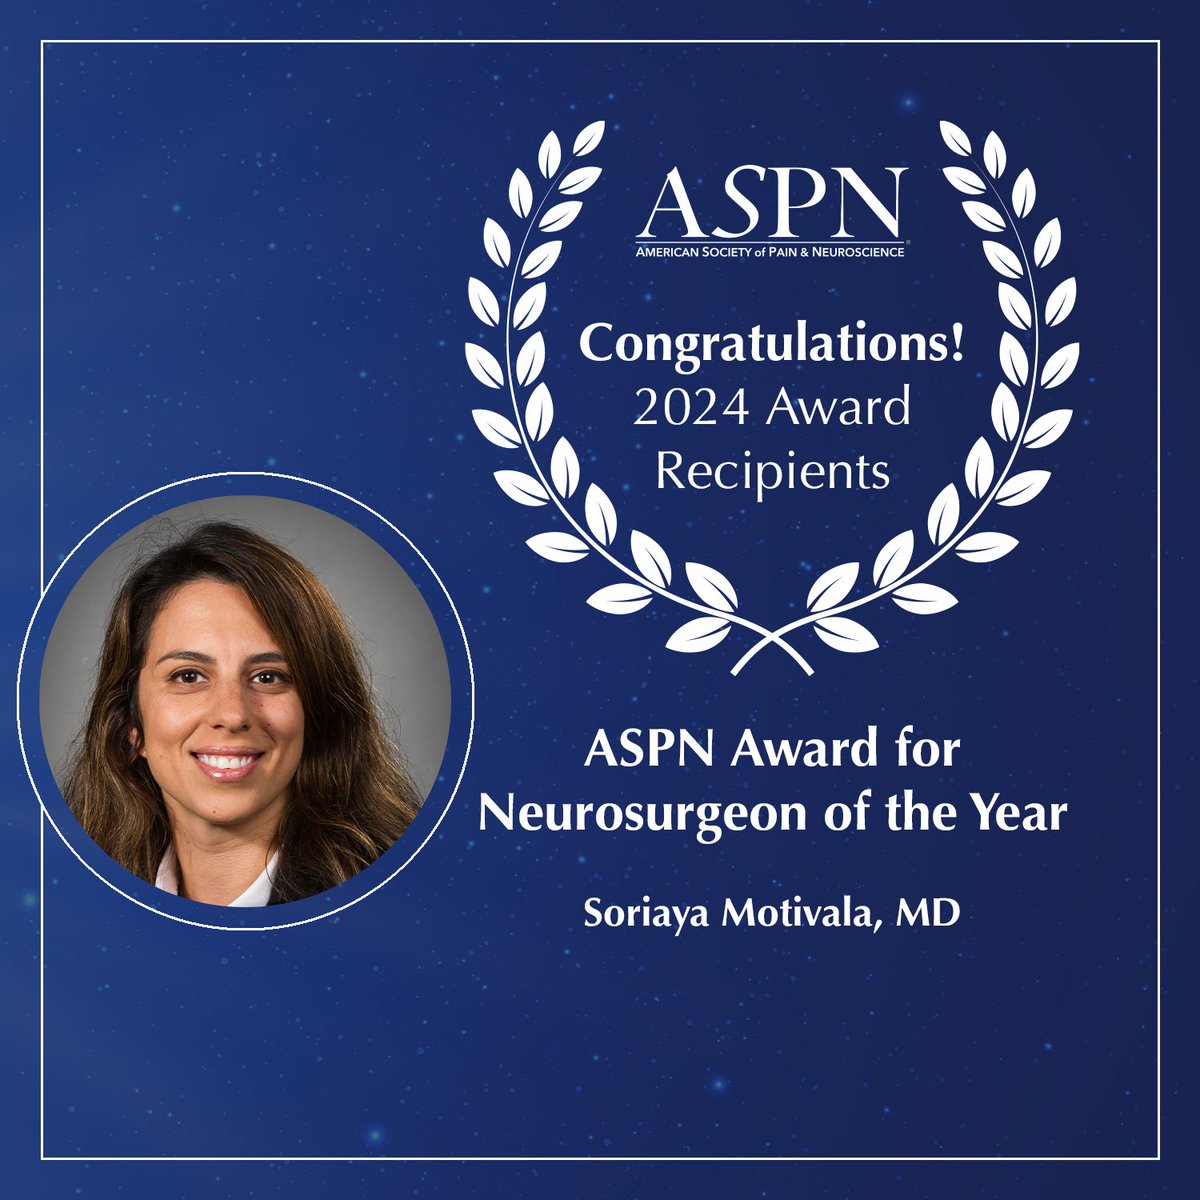 ASPN Award for Neurosurgeon of the Year goes to Dr. Soriaya Motivala. Congratulations on this well-deserved recognition of your exceptional skill, dedication, and contributions to the field of neurosurgery. You are inspiring. #ASPN2024 #Neurosurgeon